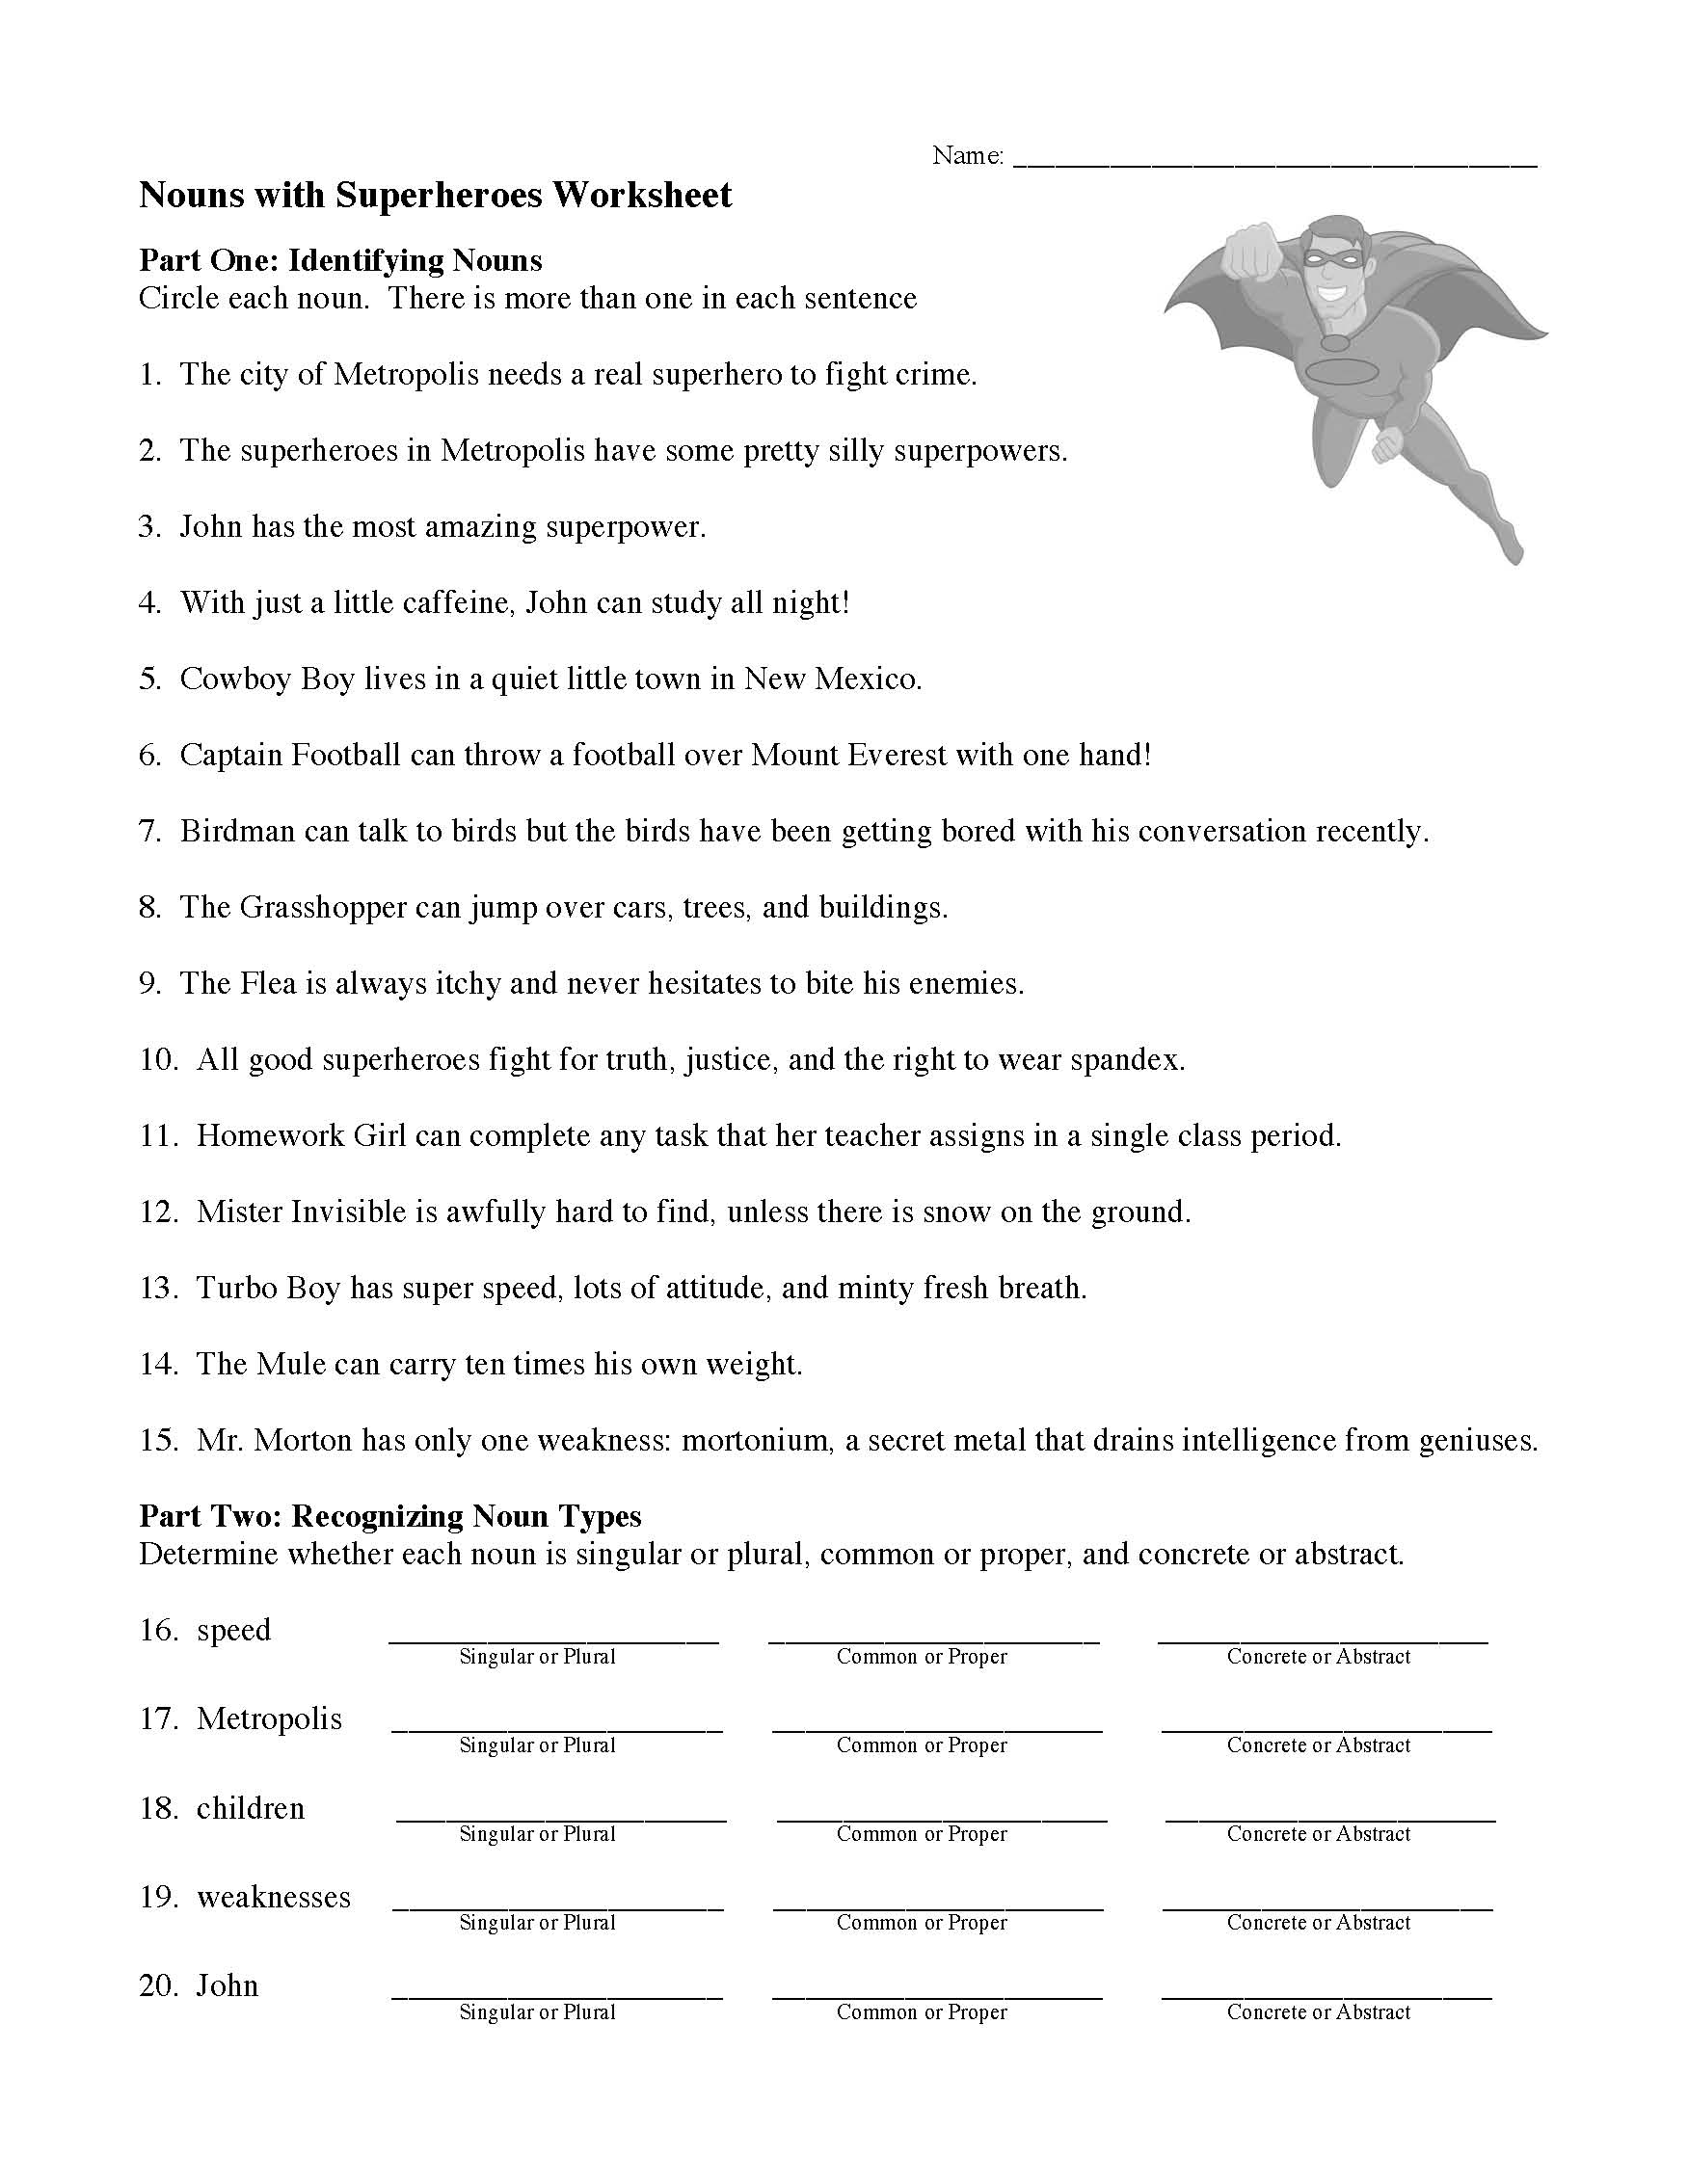 This is a preview image of the Nouns and Superheroes Worksheet.